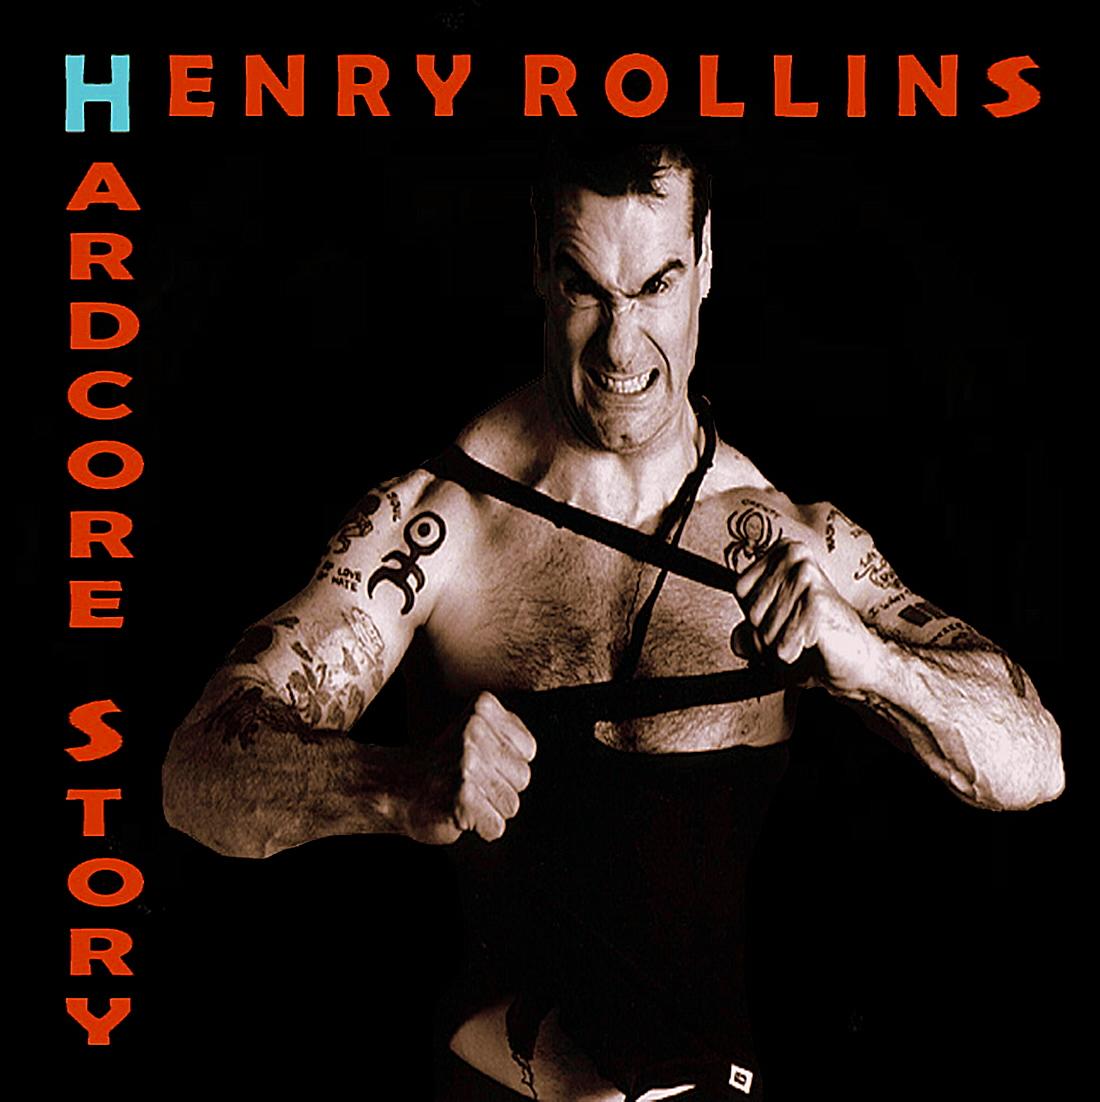 Henry Rollins - Hardcore Story (2014) - front.